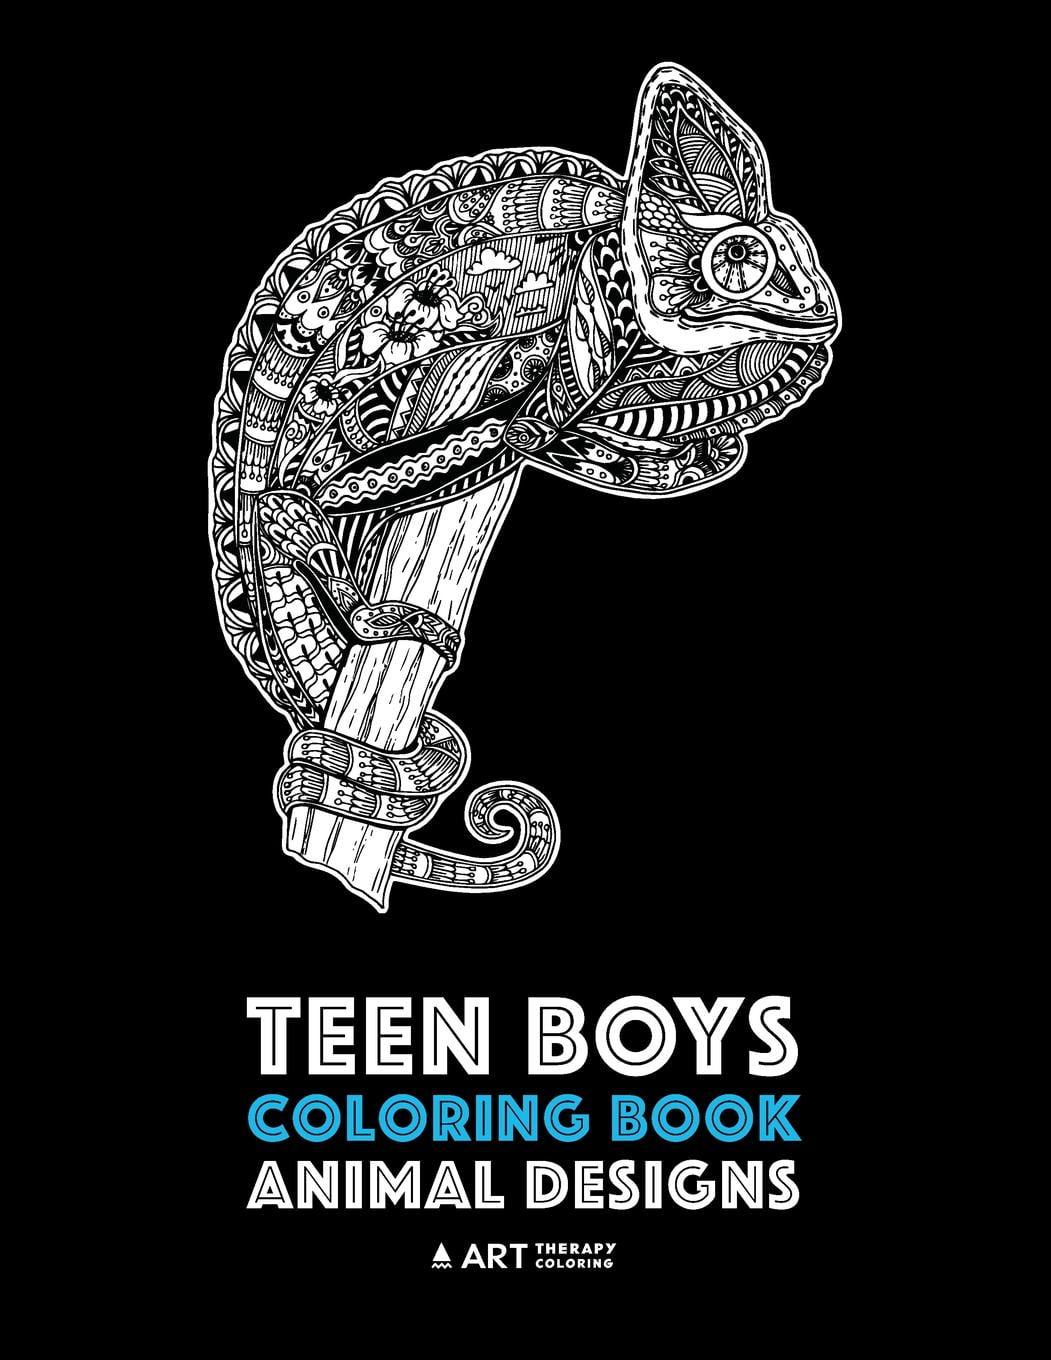 Teen-Boys-Coloring-Book-Animal-Designs-Complex-Animal-Drawings-for-Older-Boys--Teenagers-Zendoodle-Lions-Wolves-Bears-Snakes-Spiders-Scorpions--More